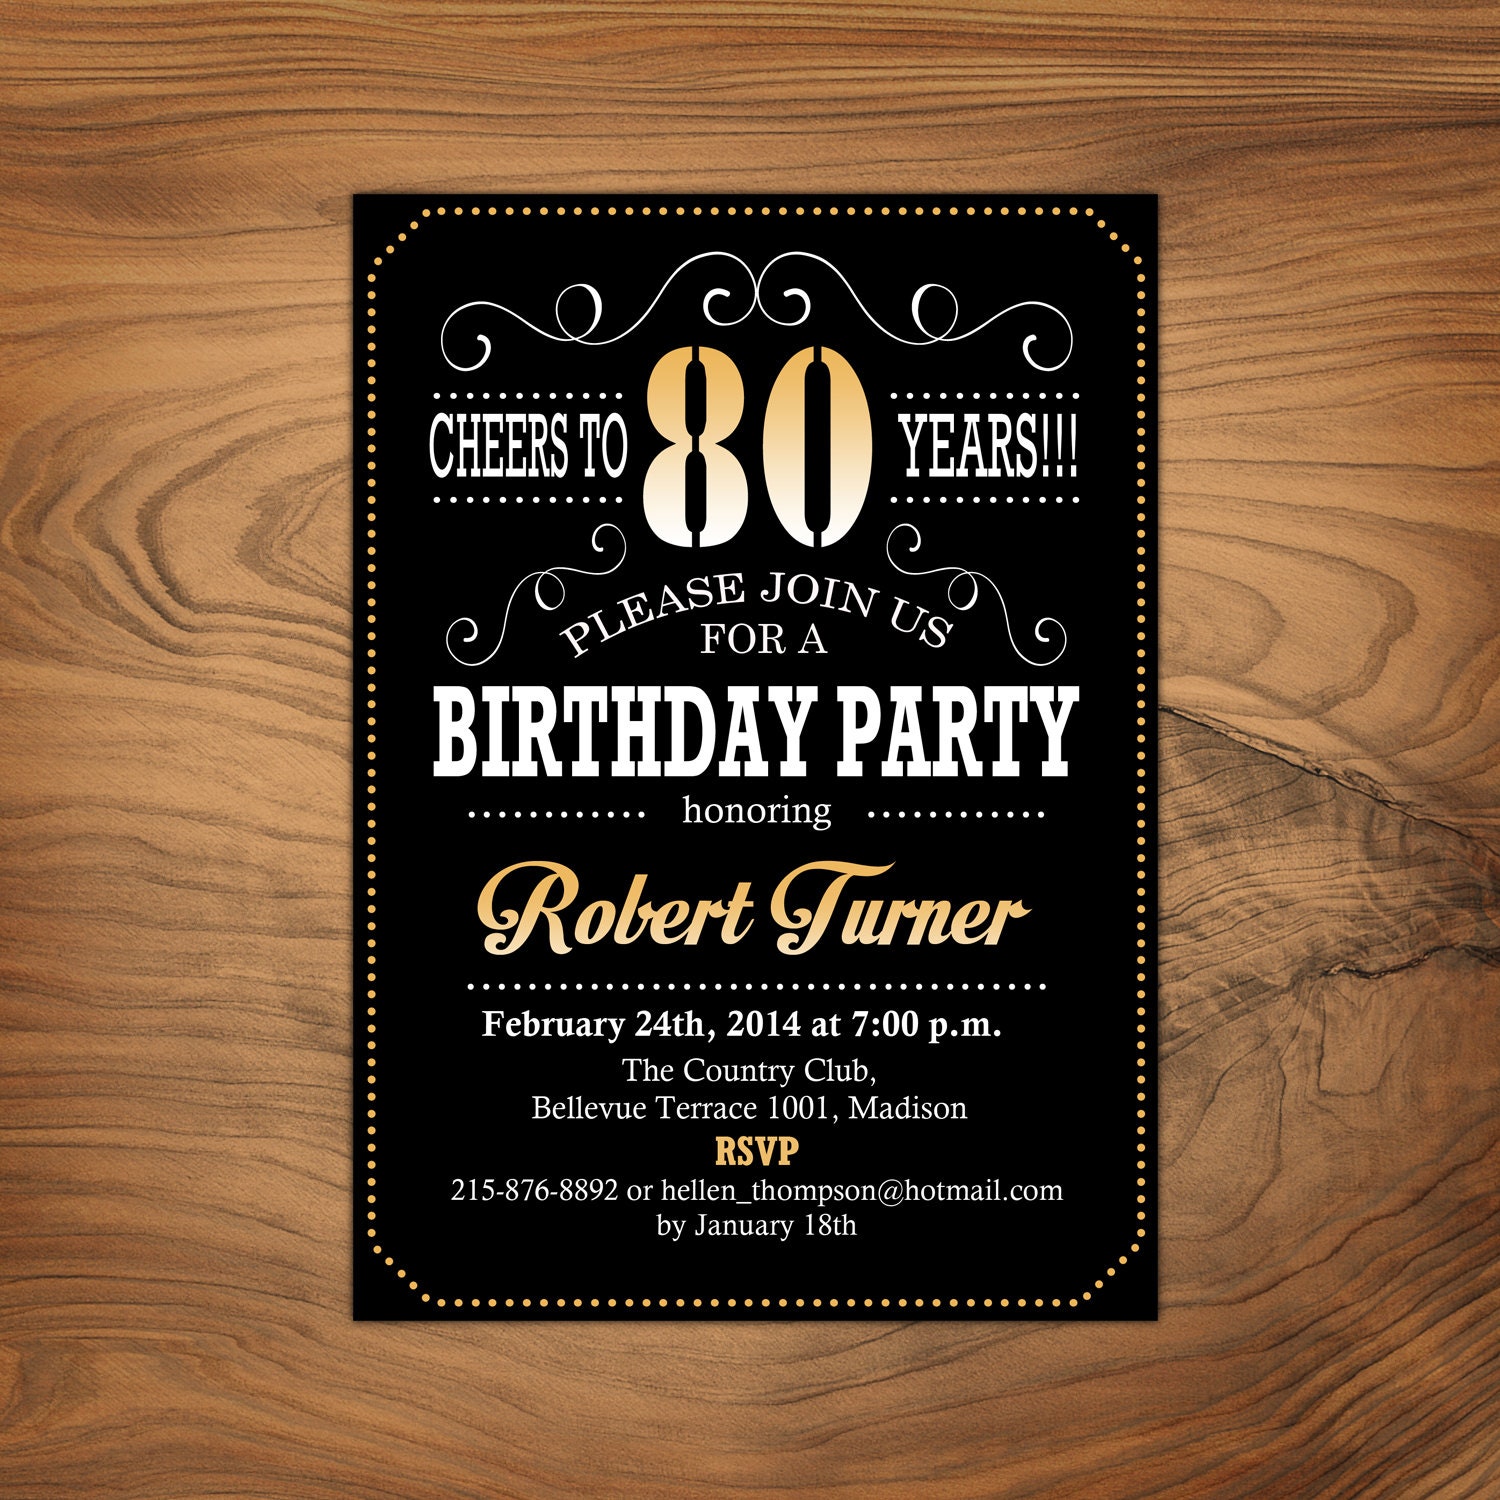 80th Birthday Invitation / Cheers To 80 Years / Any Age / Gold